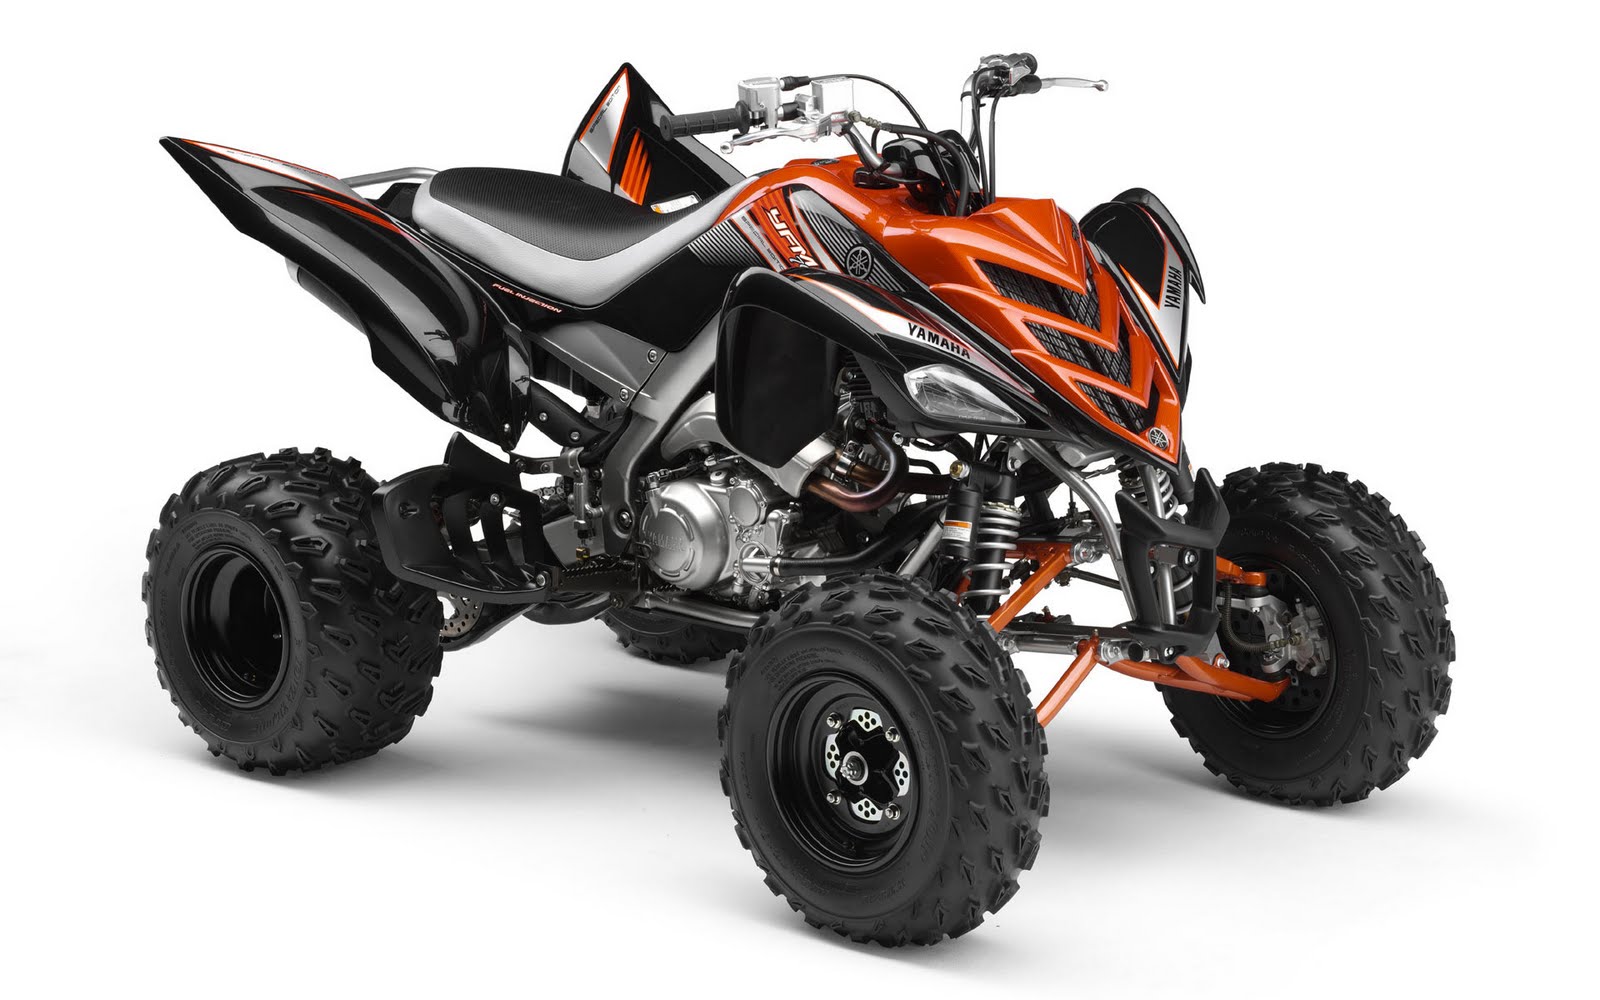 YAMAHA ATV insurance. 2007 Tesseract Concept pictures, specs